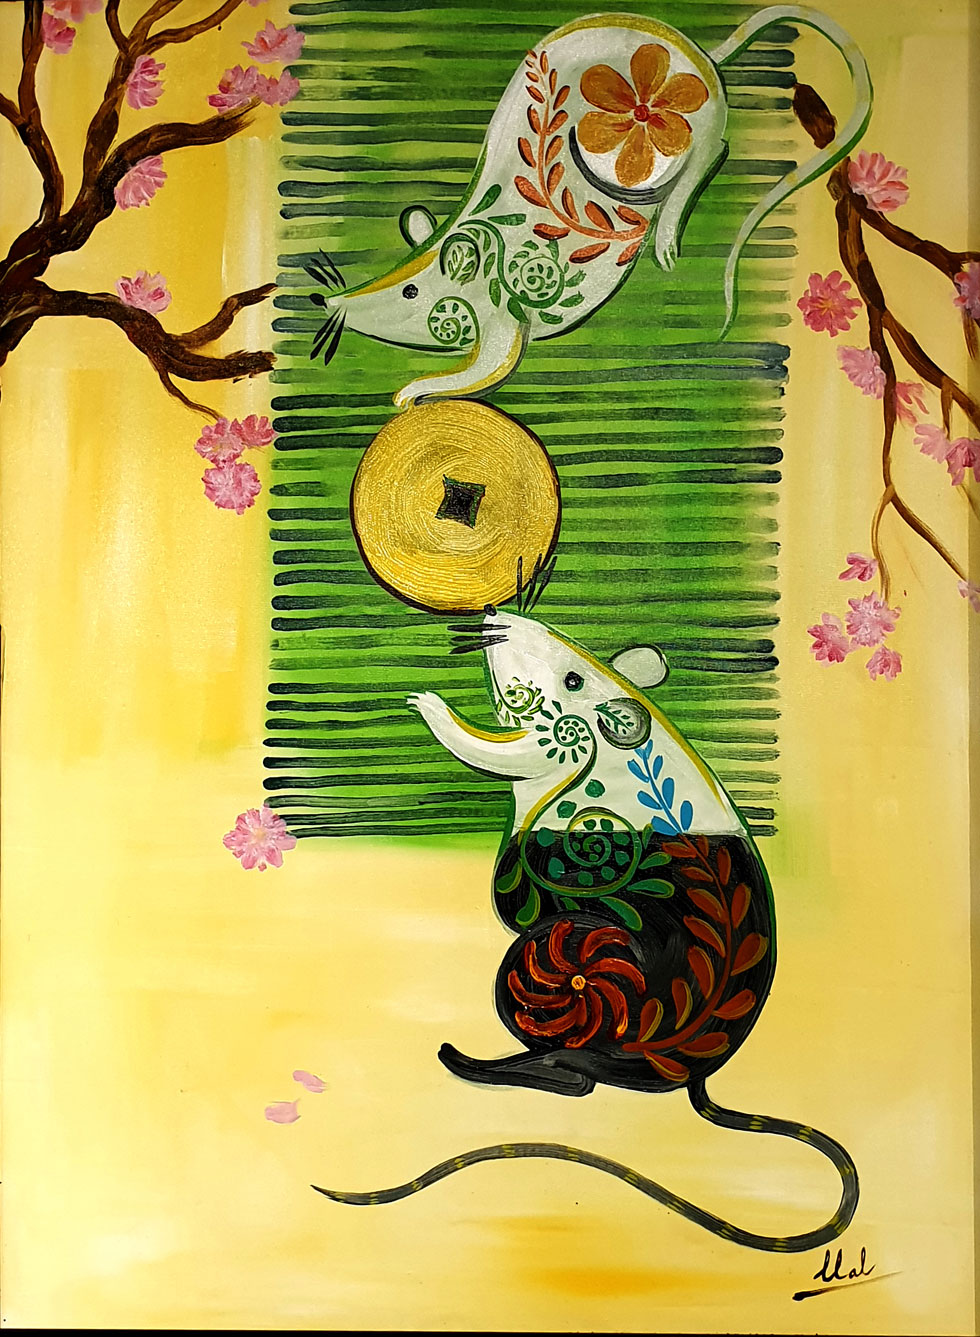 ‘Am Duong Canh Ty’ (Yin and Yang) by Nguyen Thanh Thanh